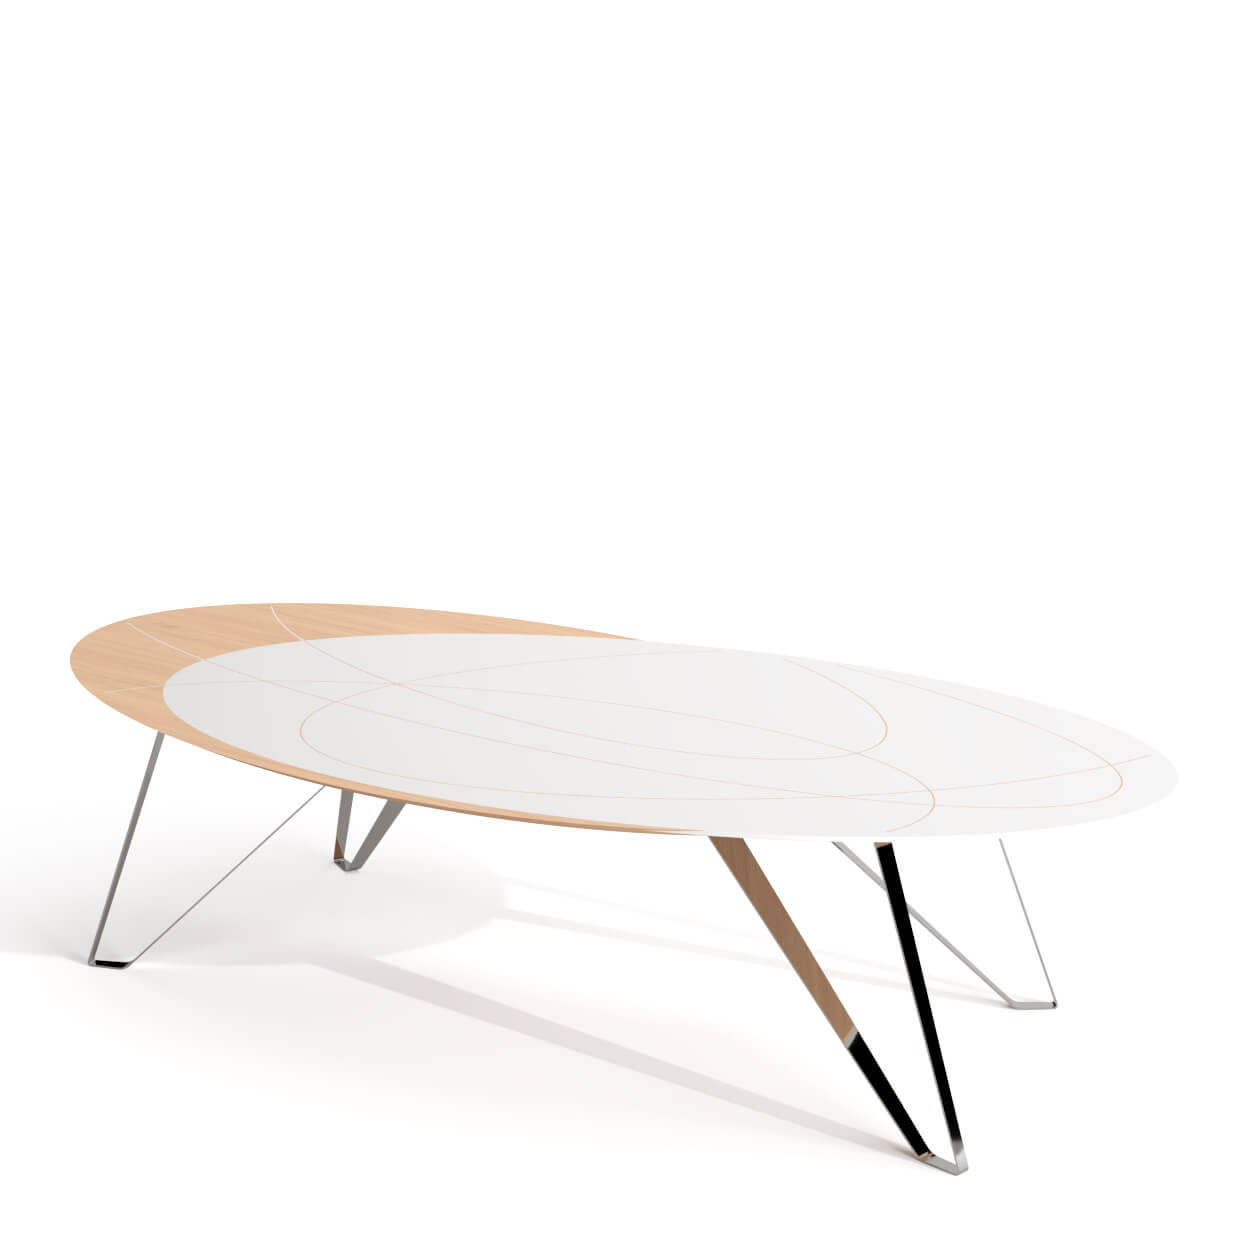 EMOTIONAL OBJECTS Dining Room Tables